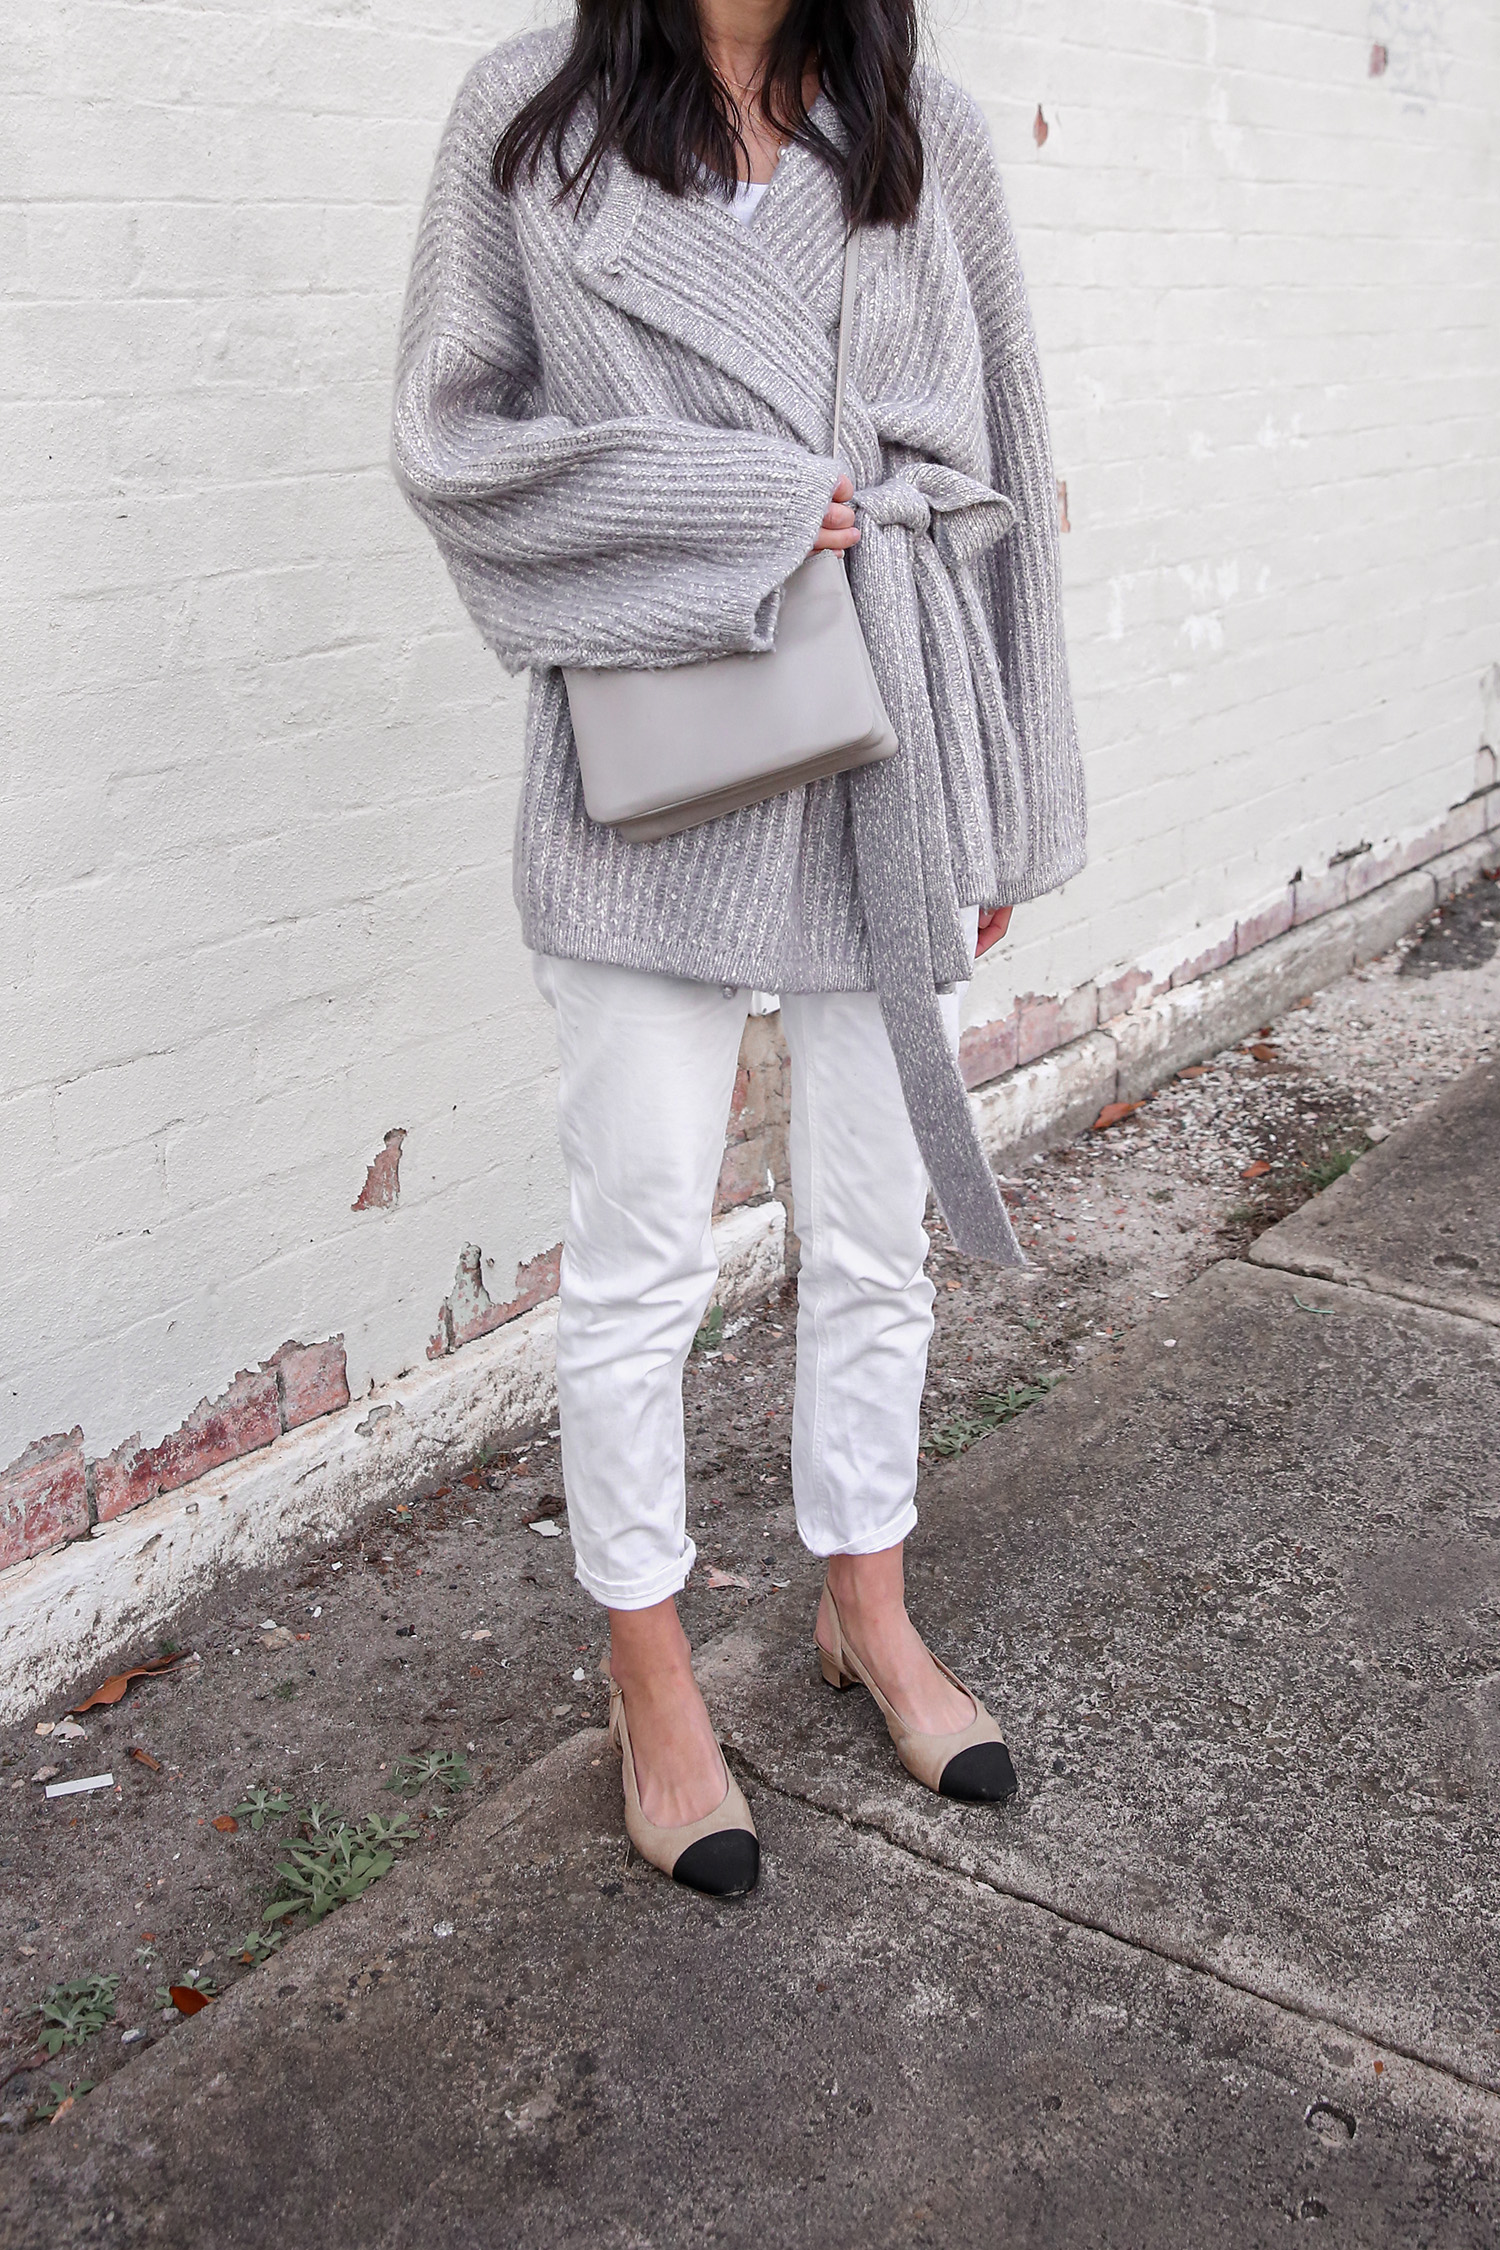 Minimal style outfit with straight leg jeans and chunky knit